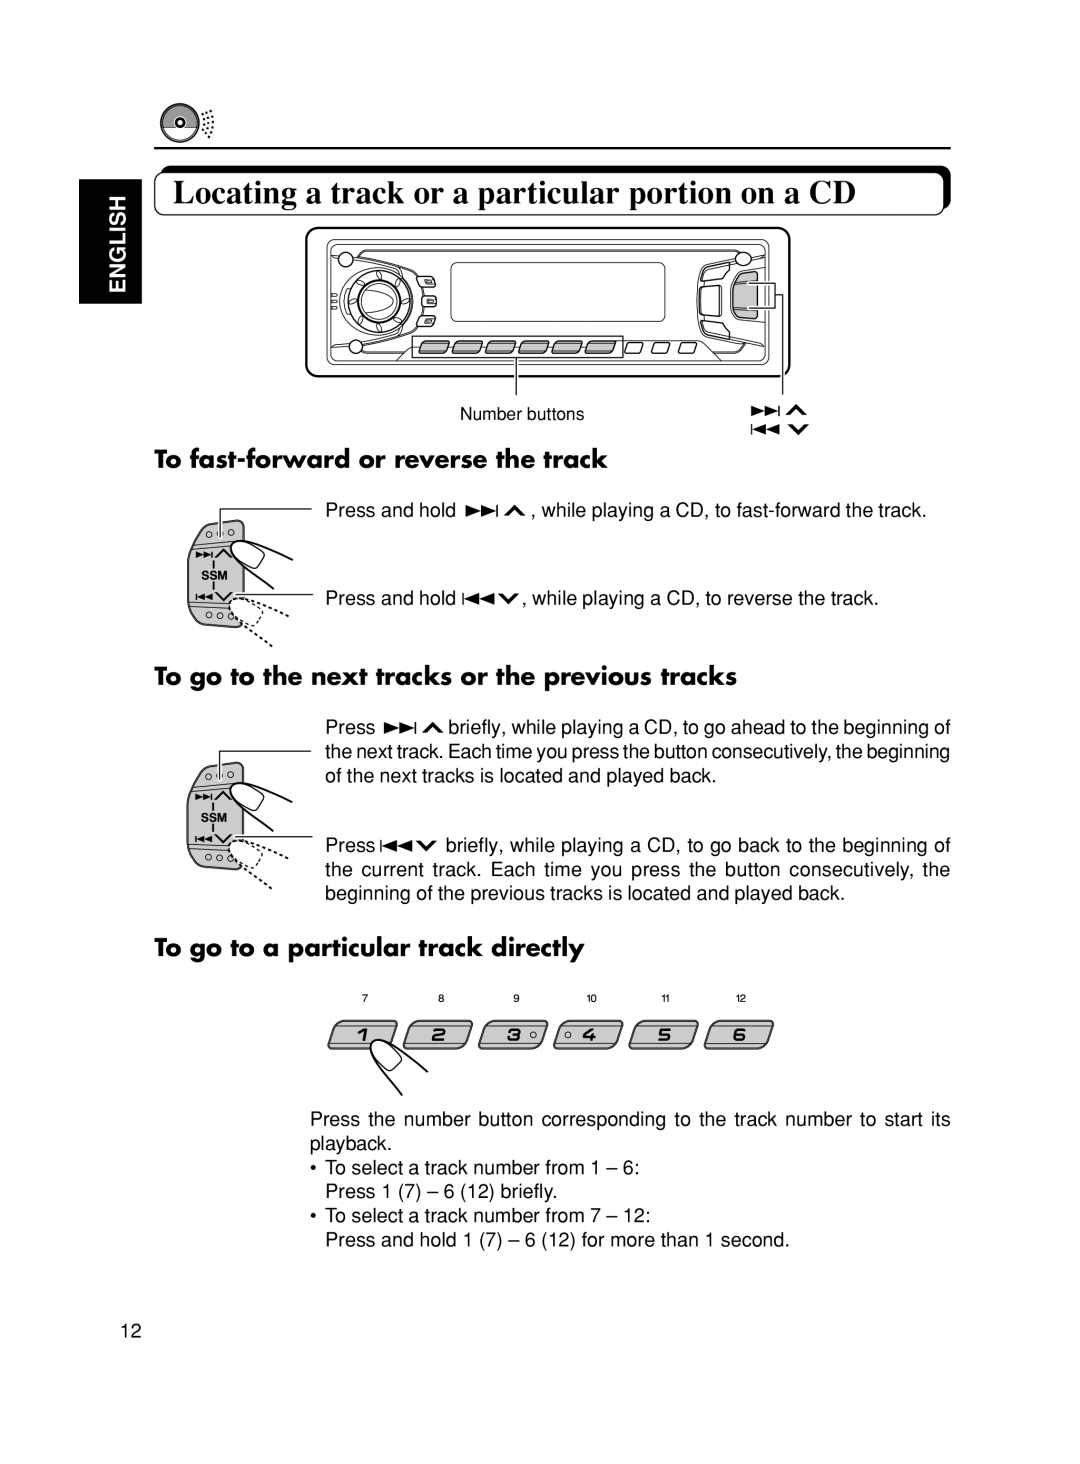 JVC KD-SX975, KD-SX875 manual Locating a track or a particular portion on a CD, To fast-forwardor reverse the track, English 